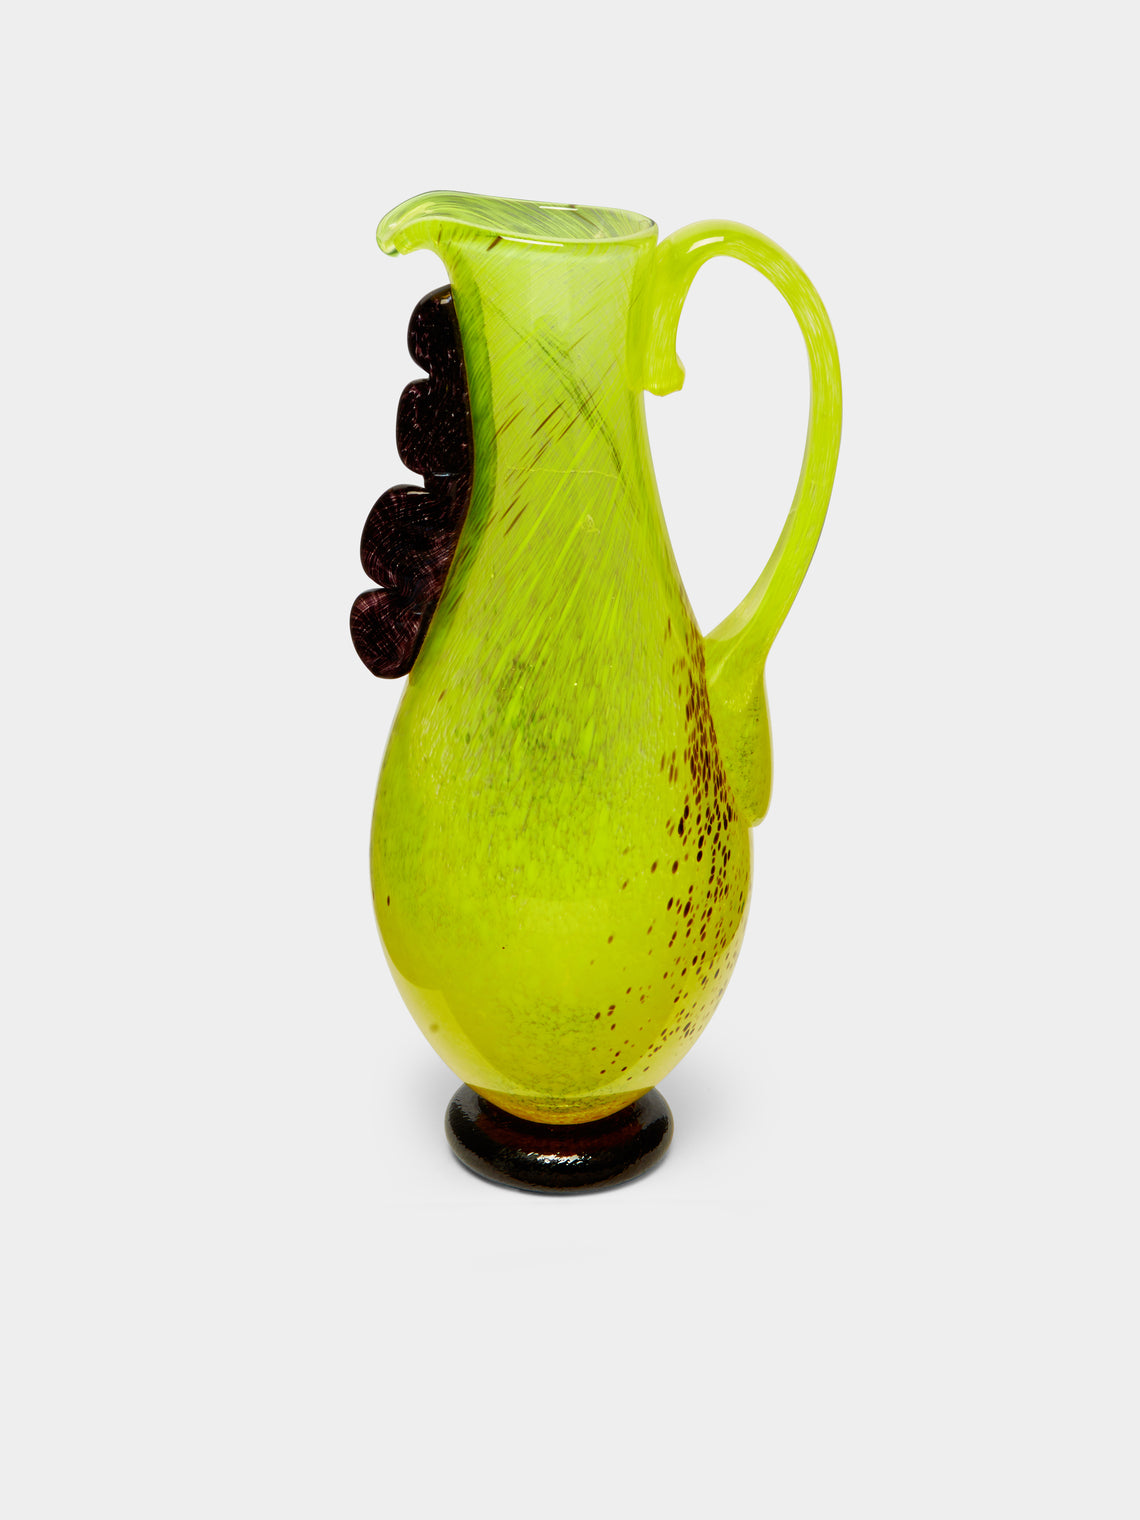 Antique and Vintage - 1950s Kosta Boda Murano Glass Pitcher -  - ABASK - 